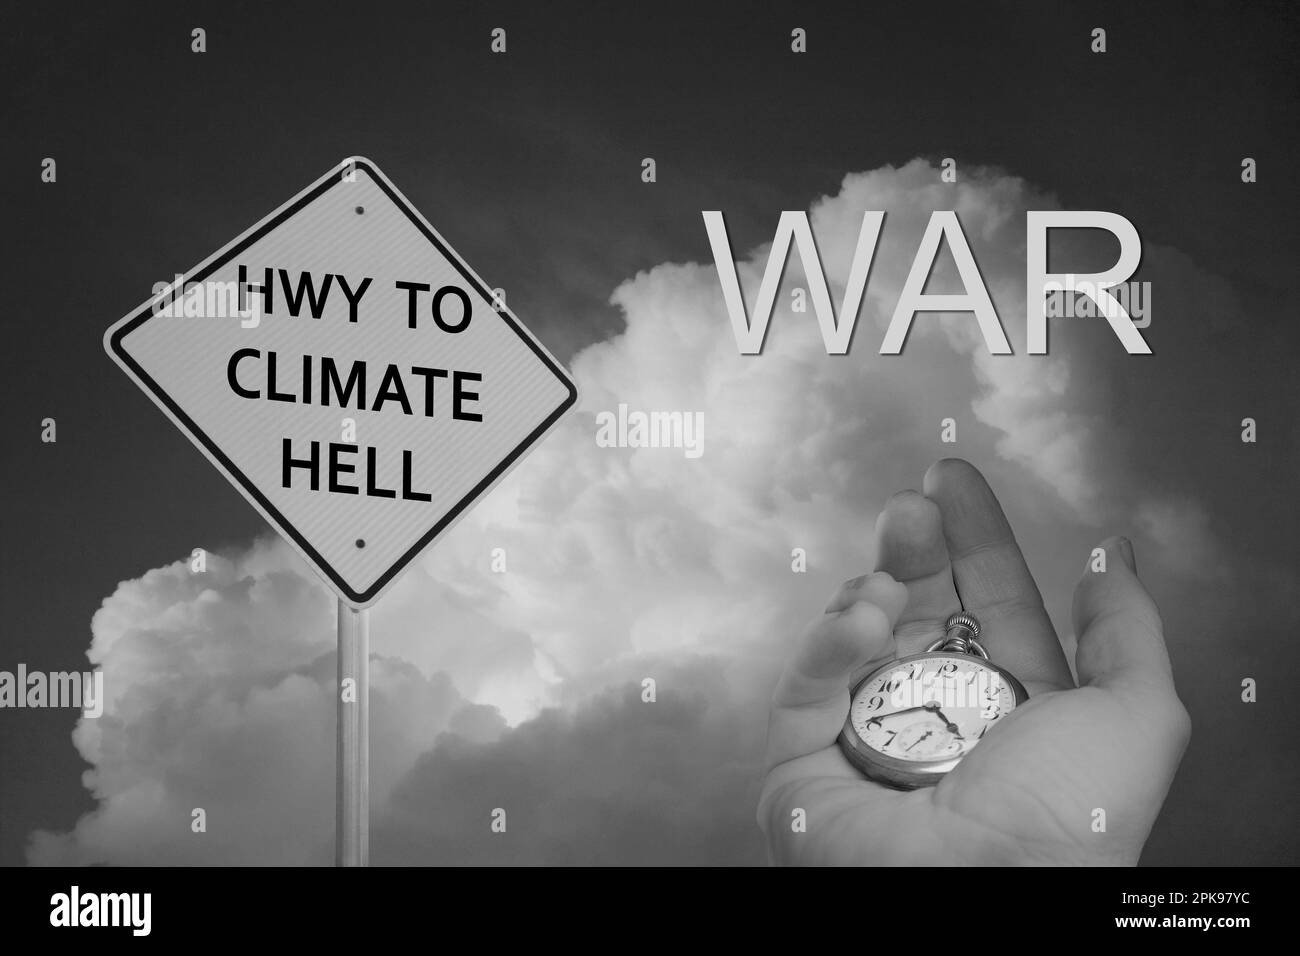 Highway To Climate Hell Stock Photo